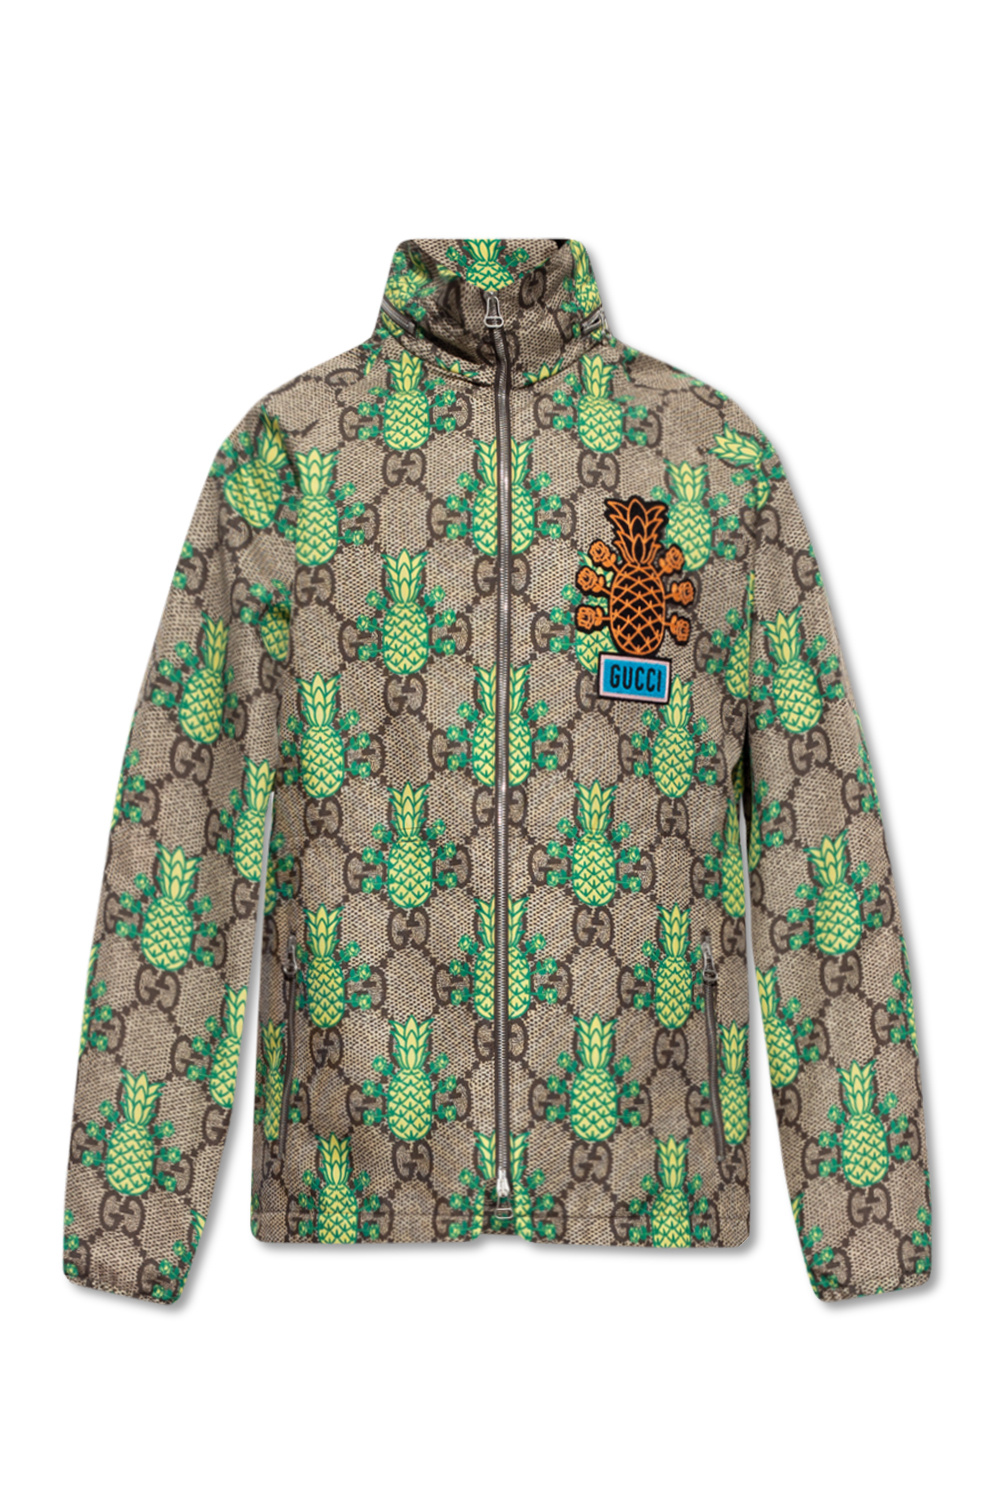 Gucci The ‘Gucci Pineapple’ collection jacket | Men's Clothing | Vitkac